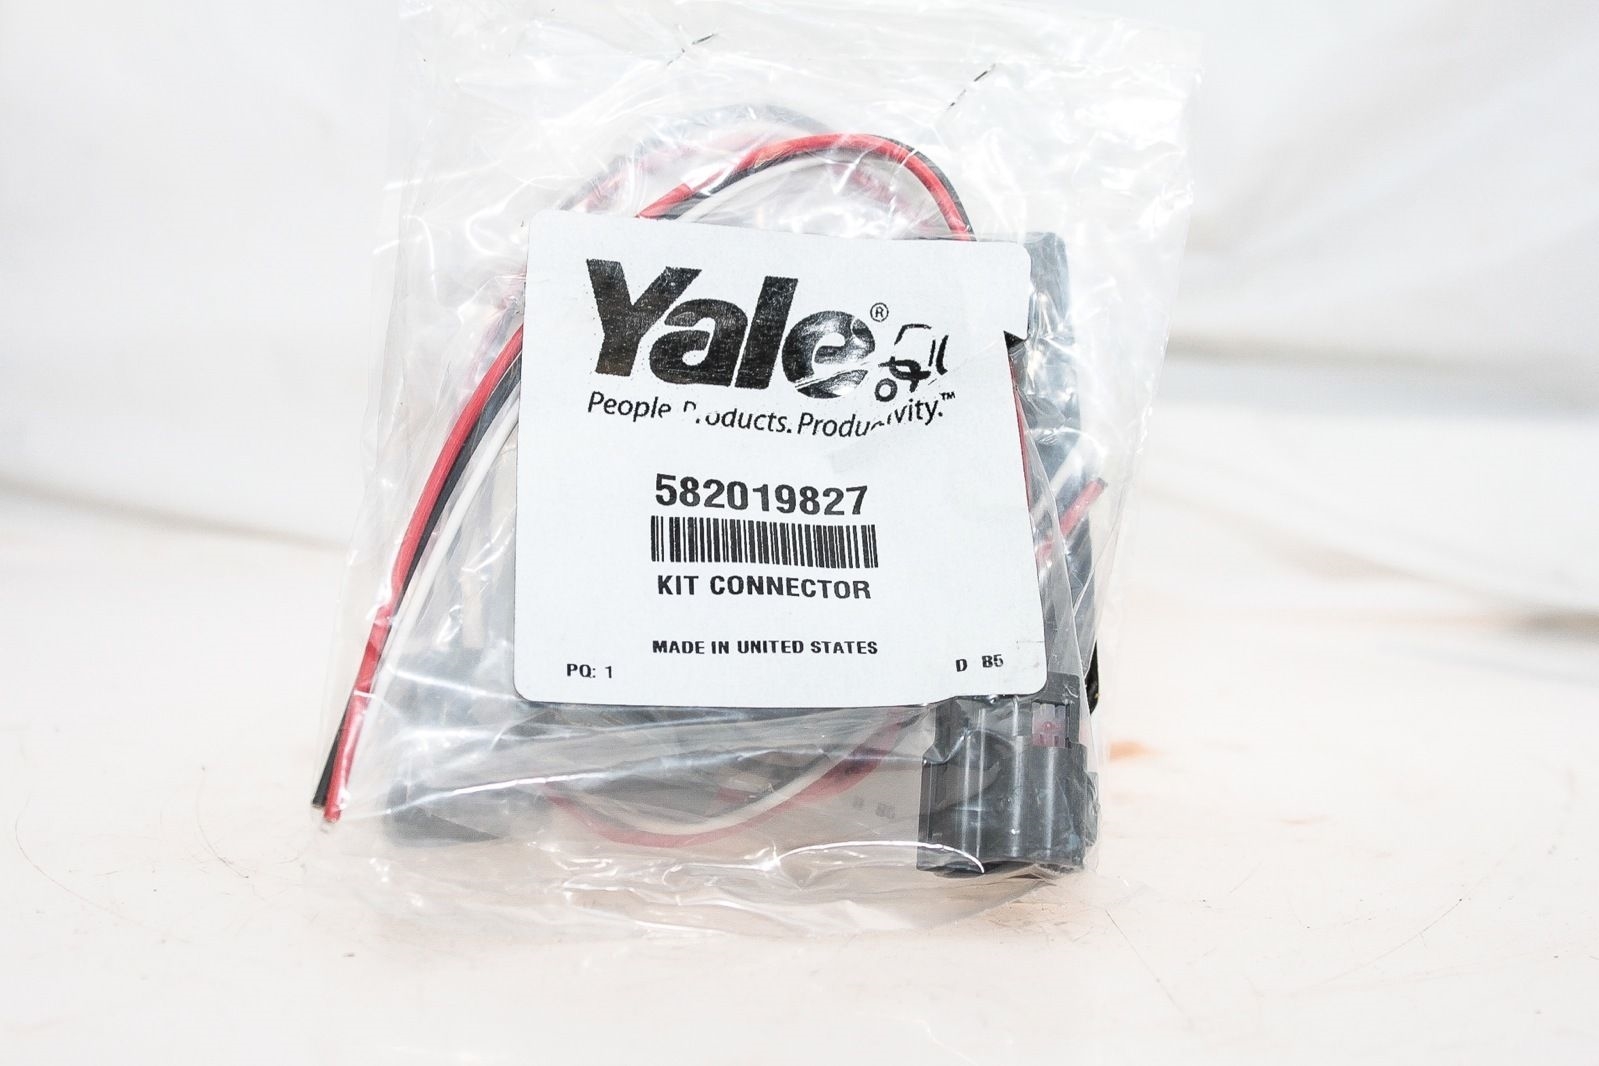 YALE 582019827 FORKLIFT CONNECTOR KIT! NEW IN LOT OF 3! FAST SHIPPING! (F57) 2